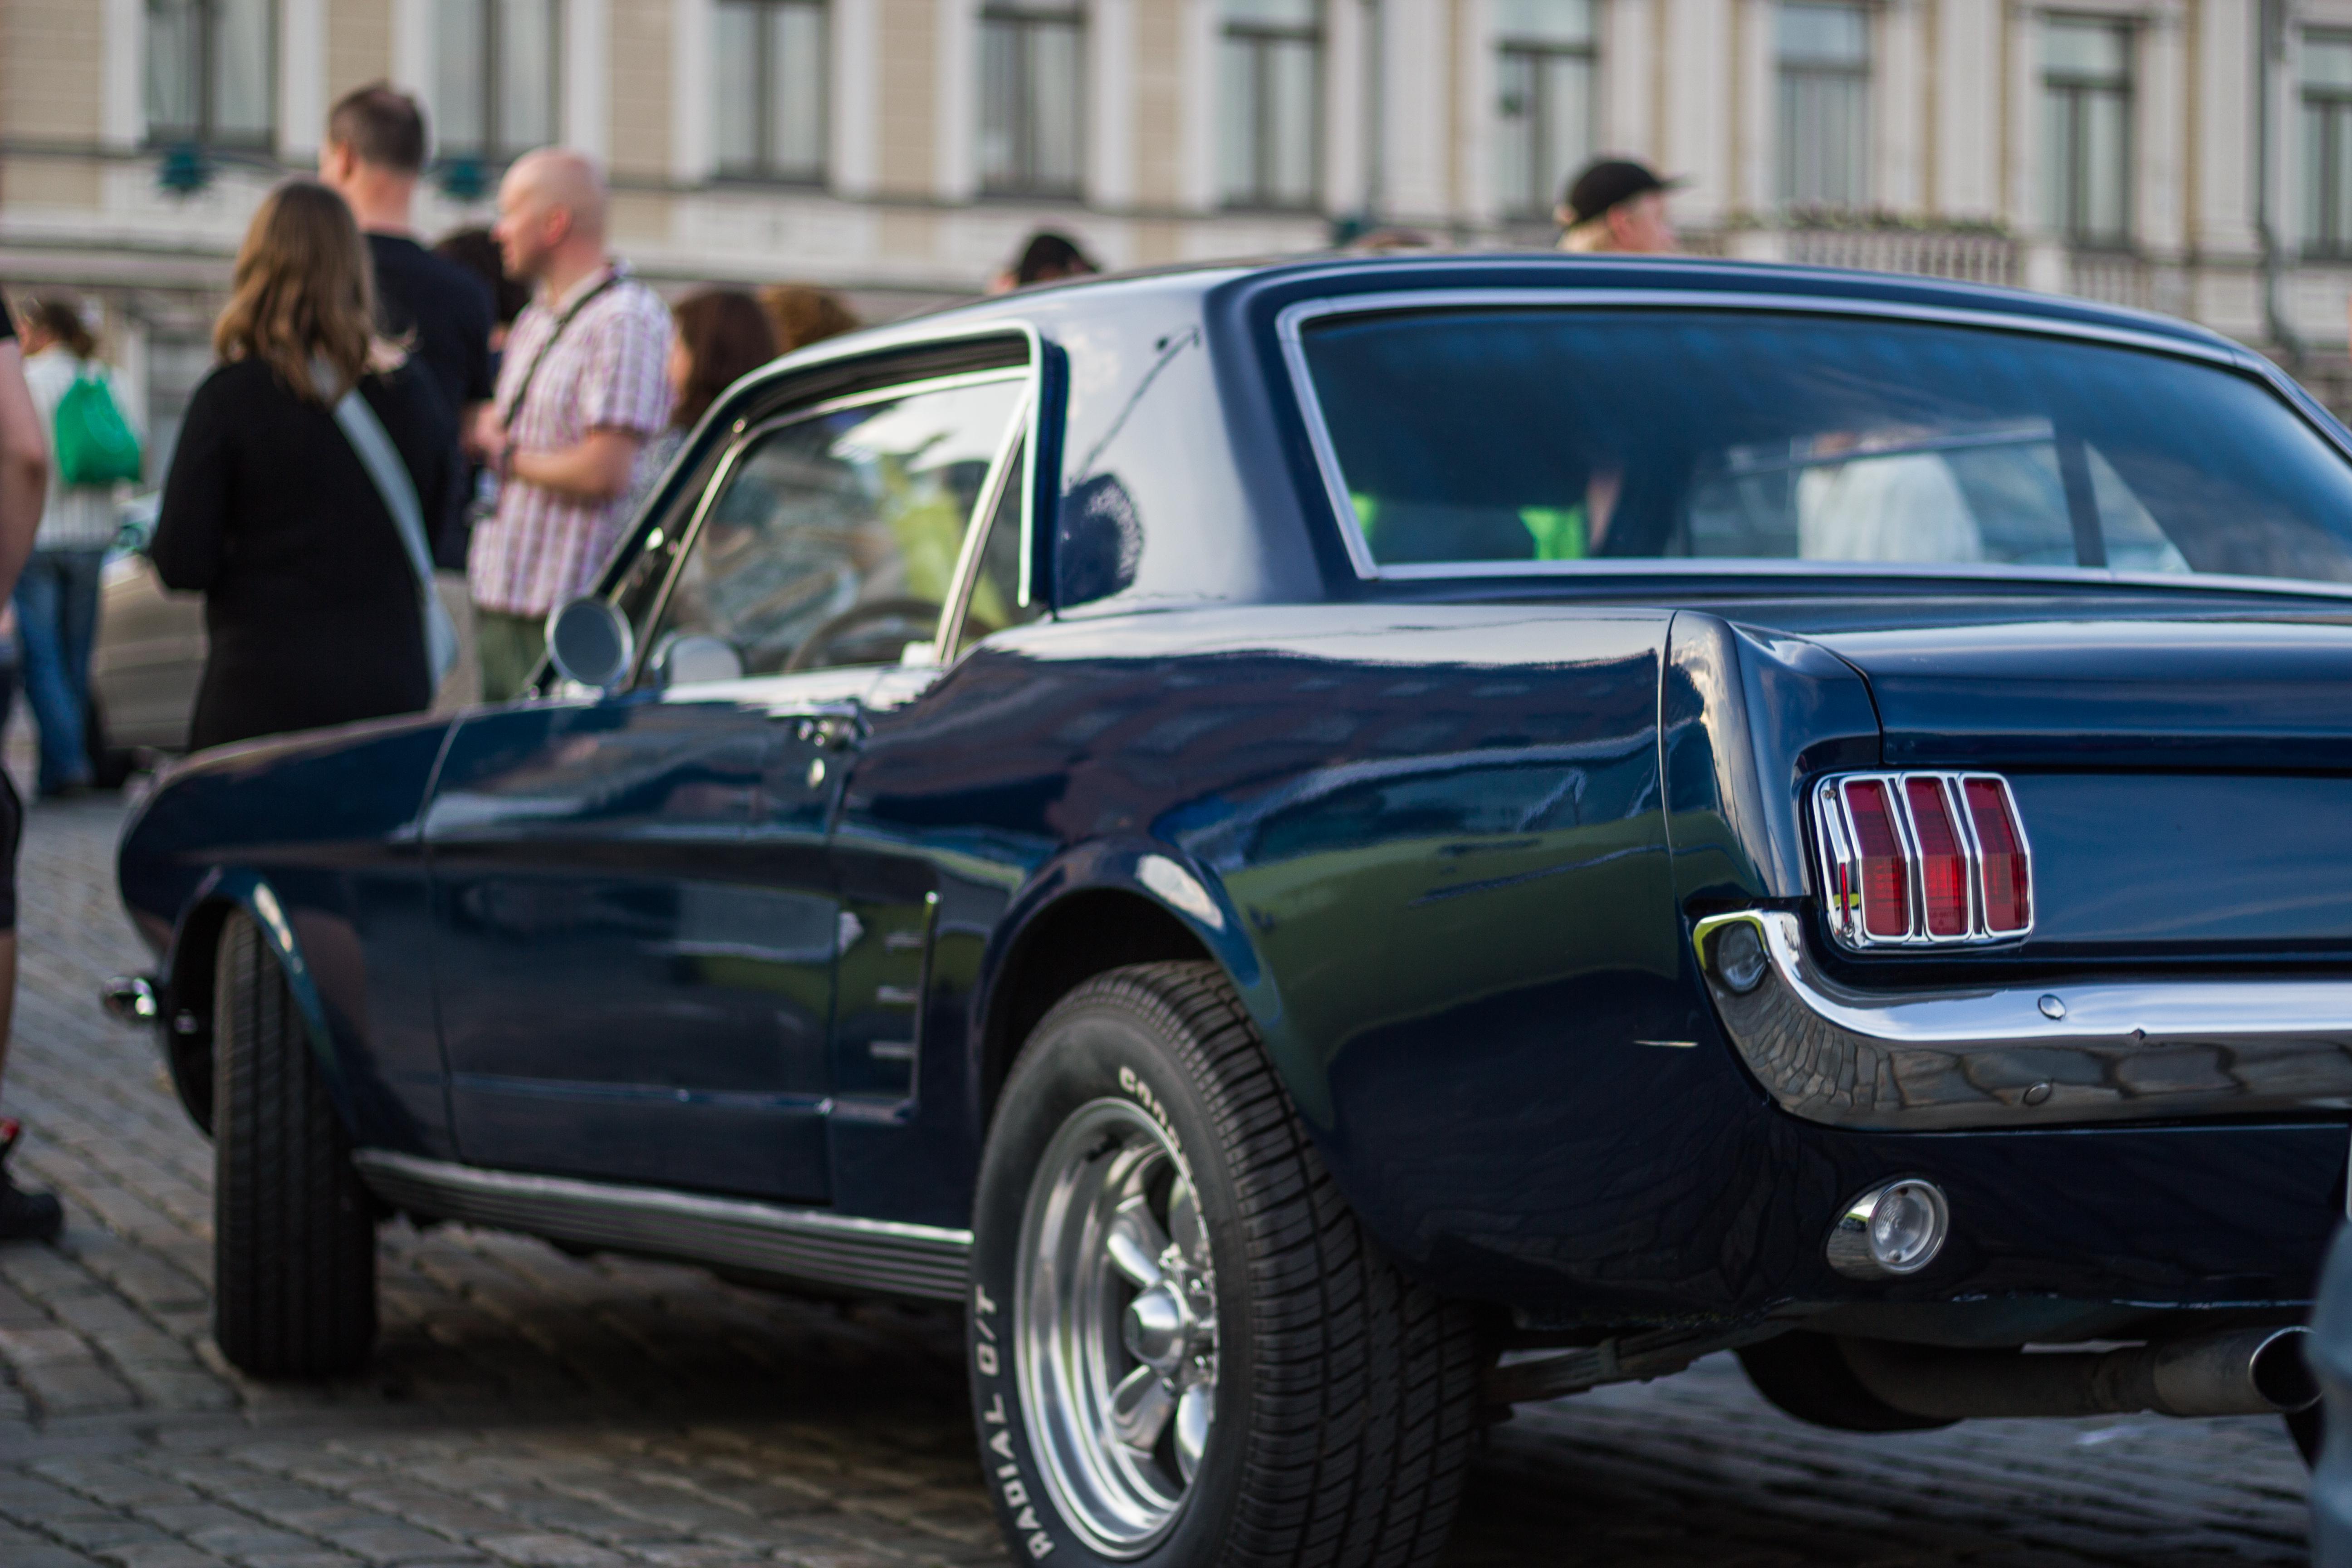 Mustang 4K wallpaper for your desktop or mobile screen free and easy to download